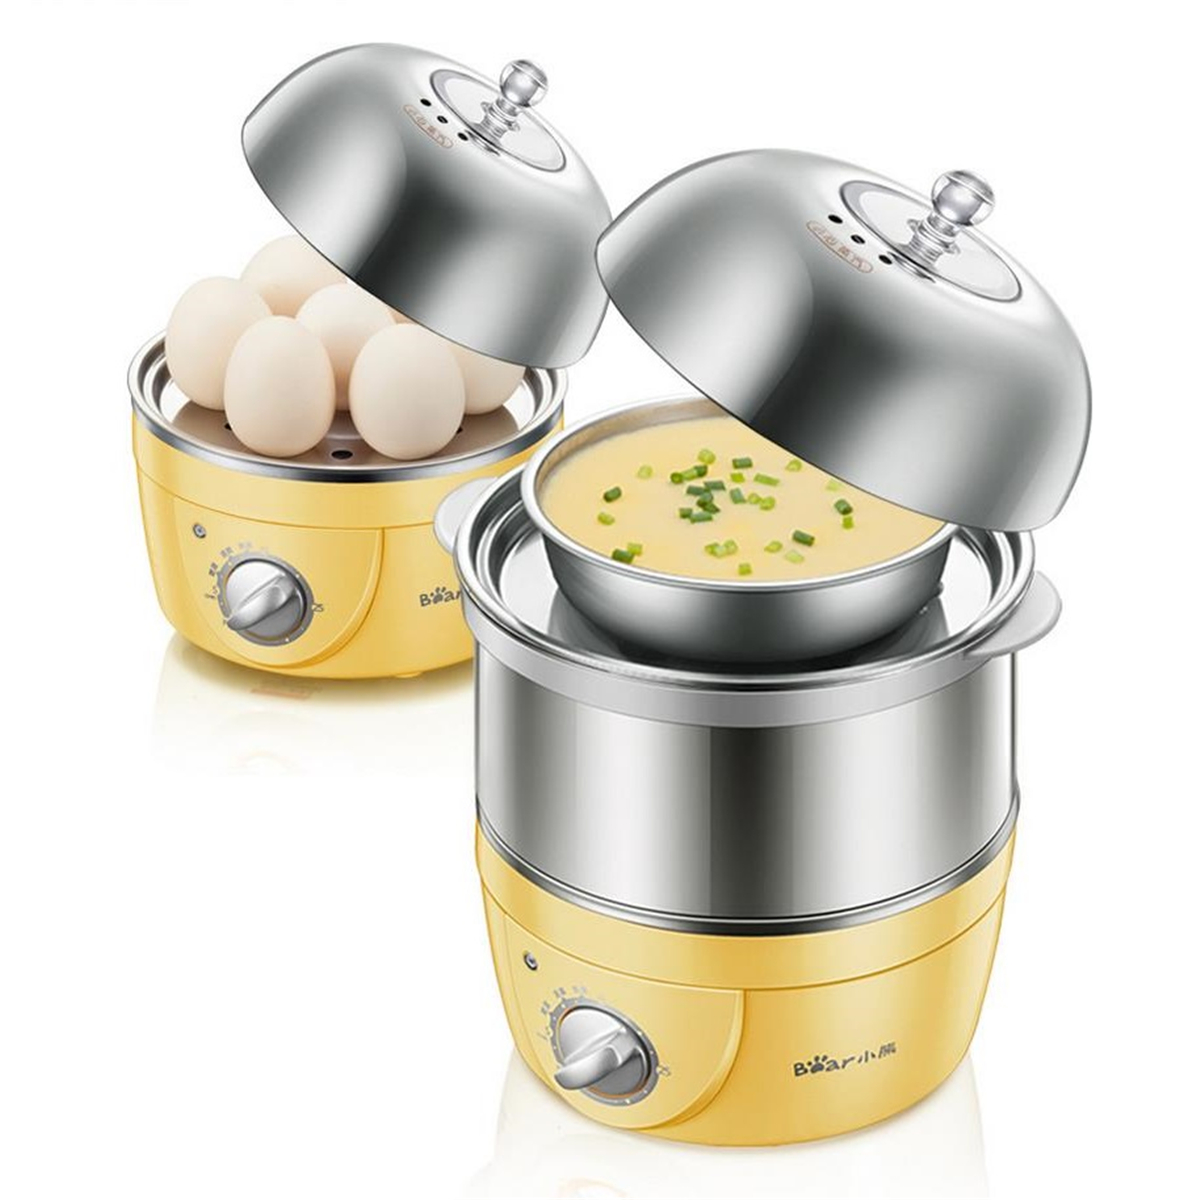 

220V 360W Yellow Stainless Steel Egg Boiler Machine Multi-function with Automatic Power Off for 14Pcs Eggs